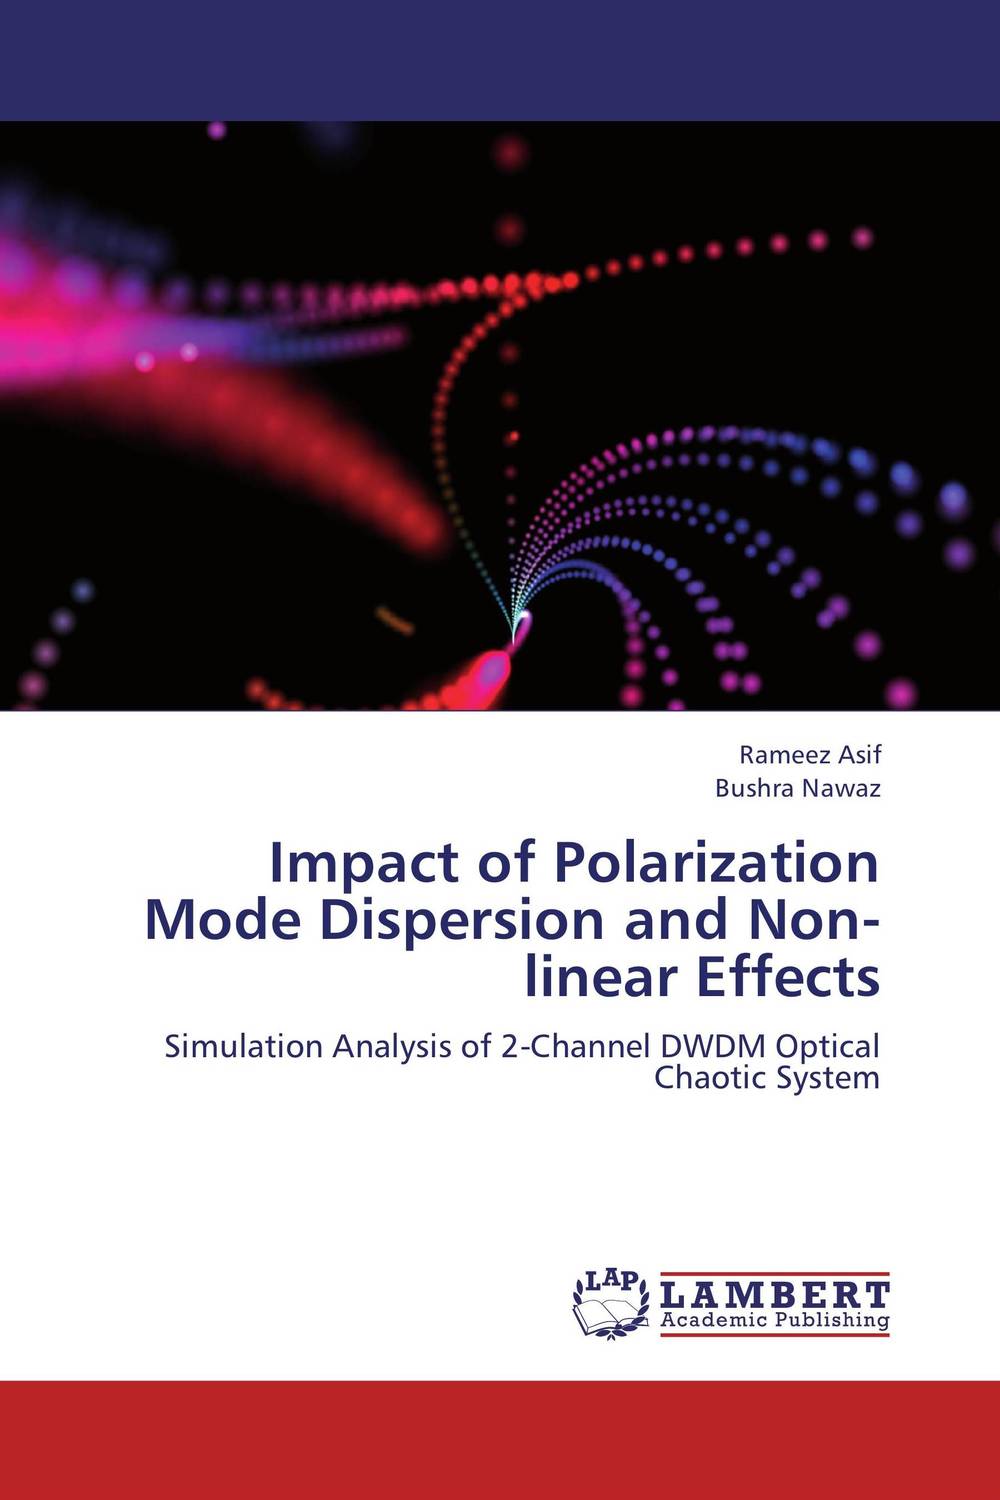 Impact of Polarization Mode Dispersion and Non-linear Effects